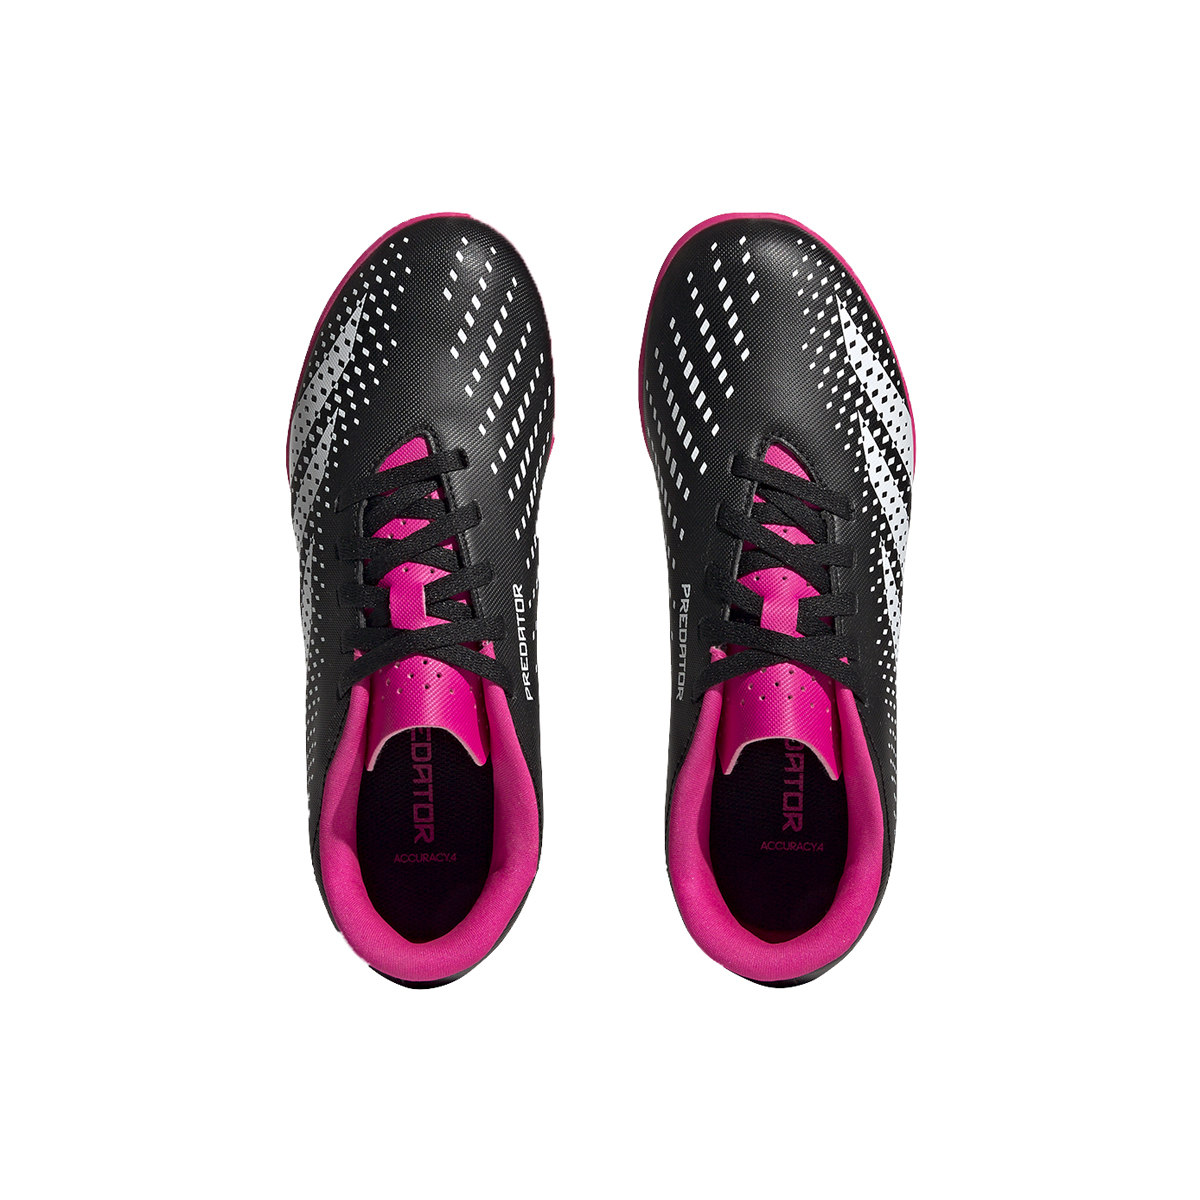 Botines adidas Predator Accuracy 4 Tf Boots,  image number null